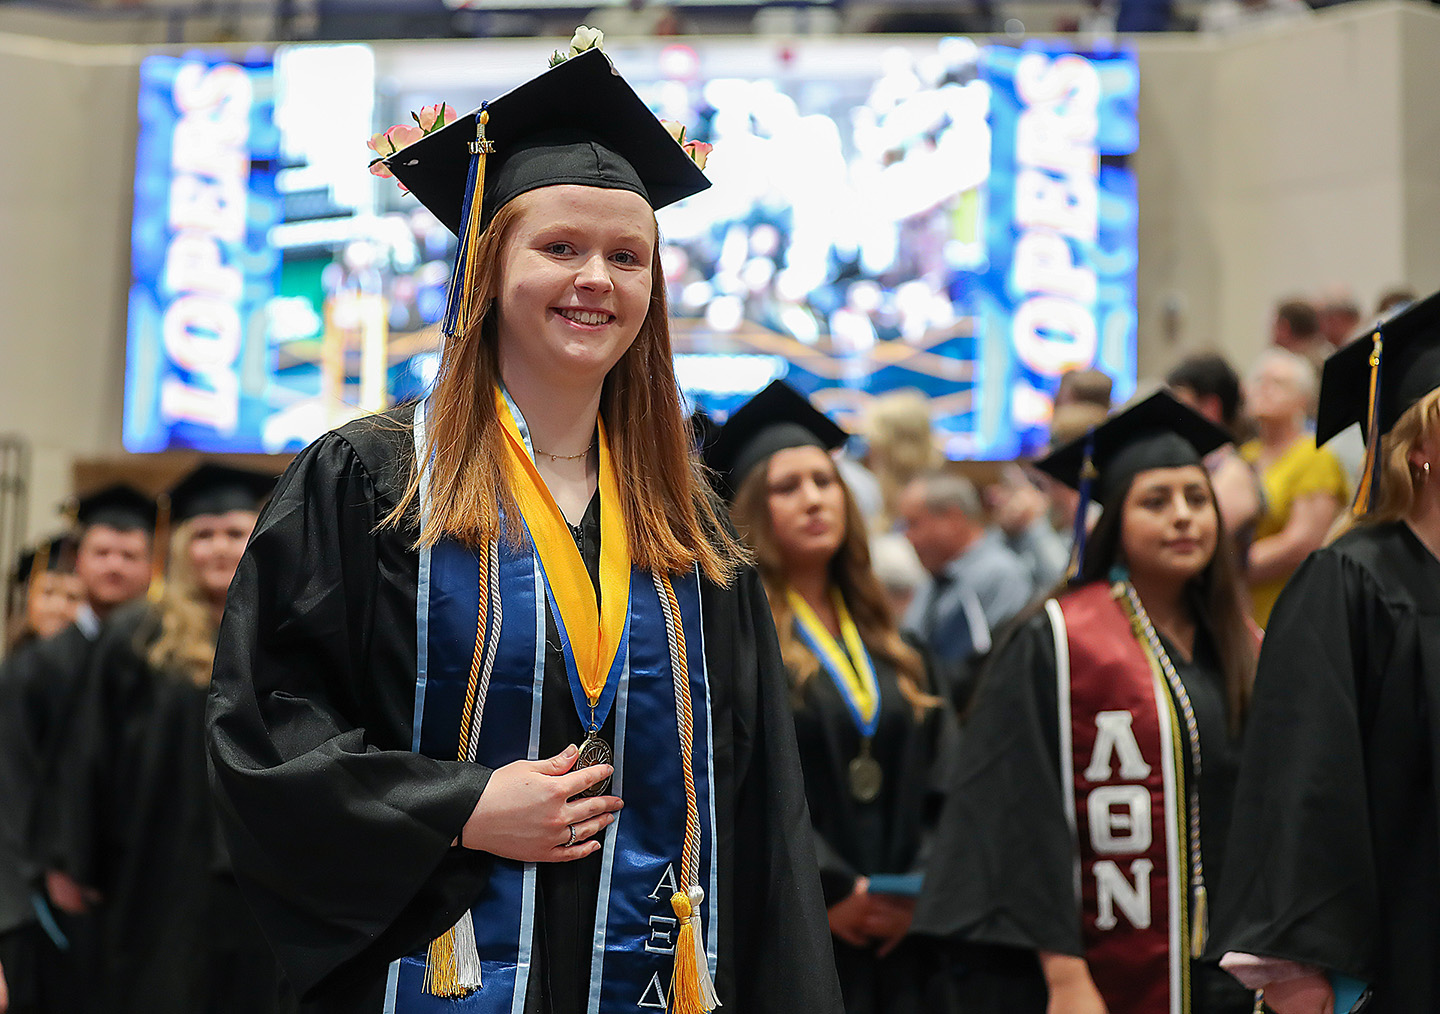 Jacque Platt graduated from UNK in May with a bachelor’s degree in psychology. She’s pursuing a master’s degree in public health administration and policy at the University of Nebraska Medical Center in Omaha.